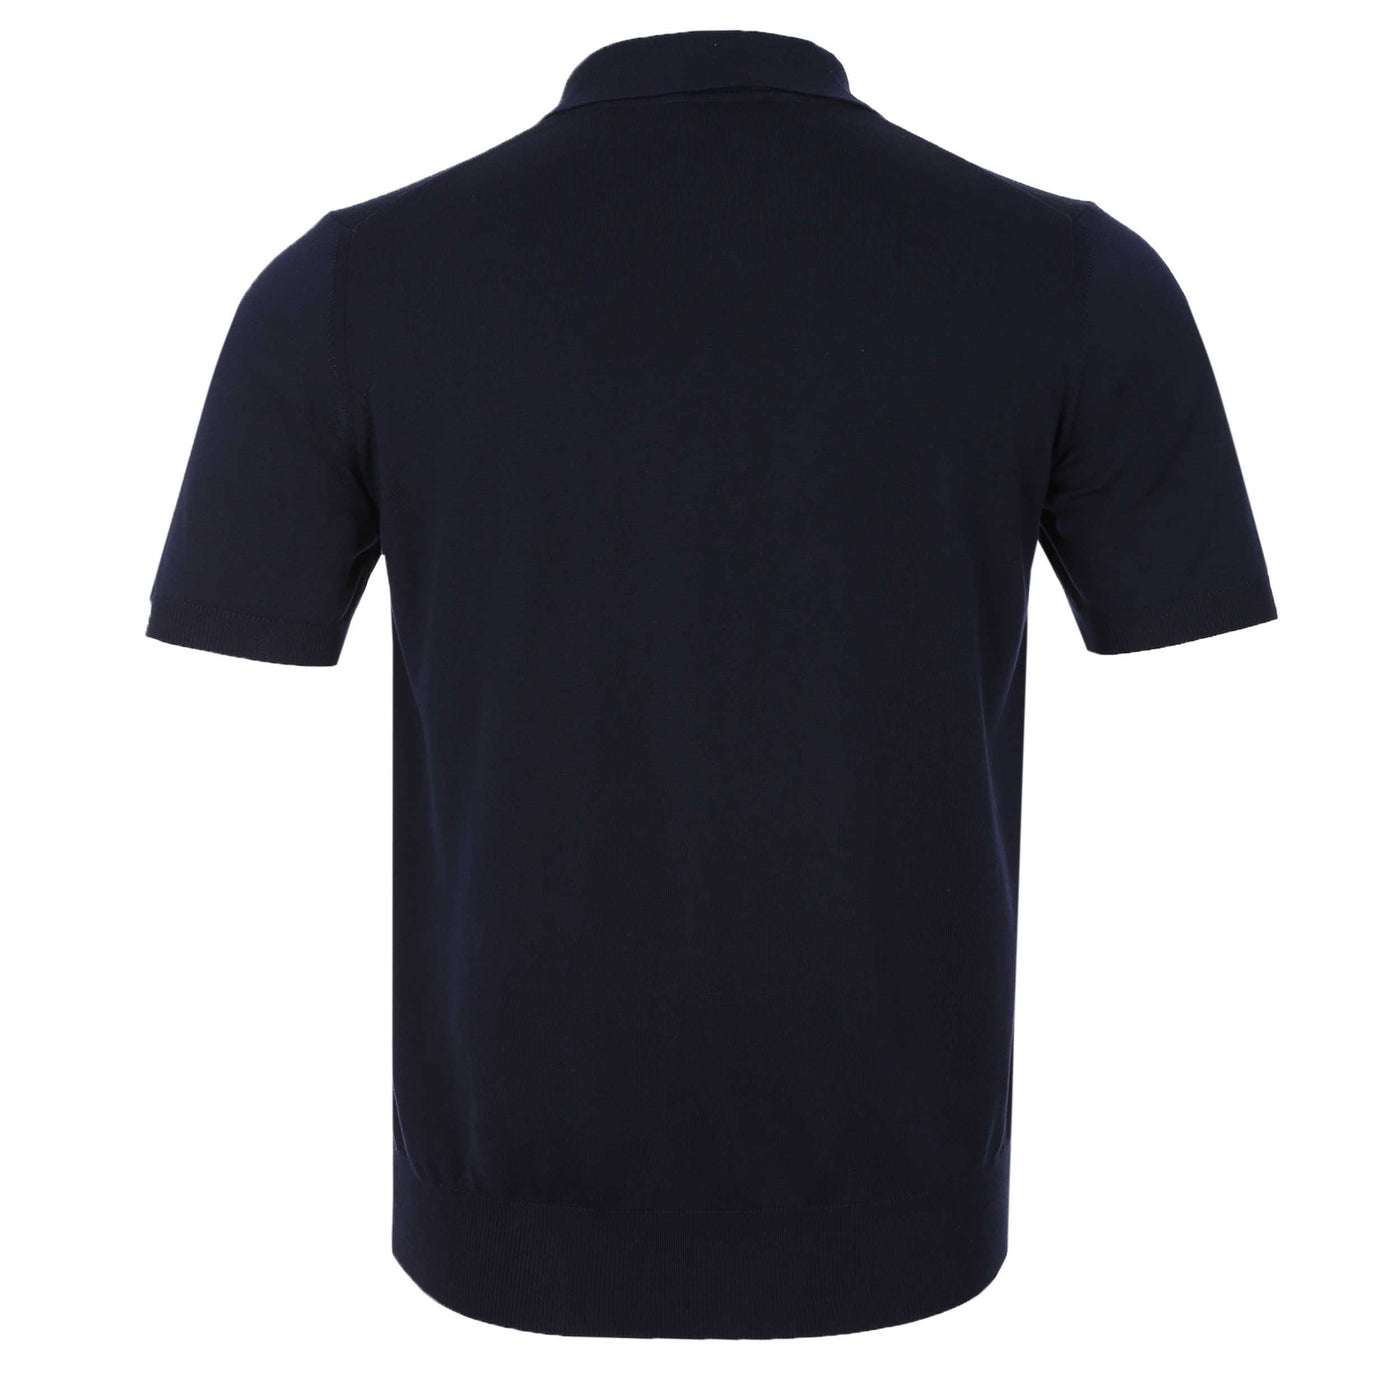 Canali Zip Polo Shirt in Navy Back